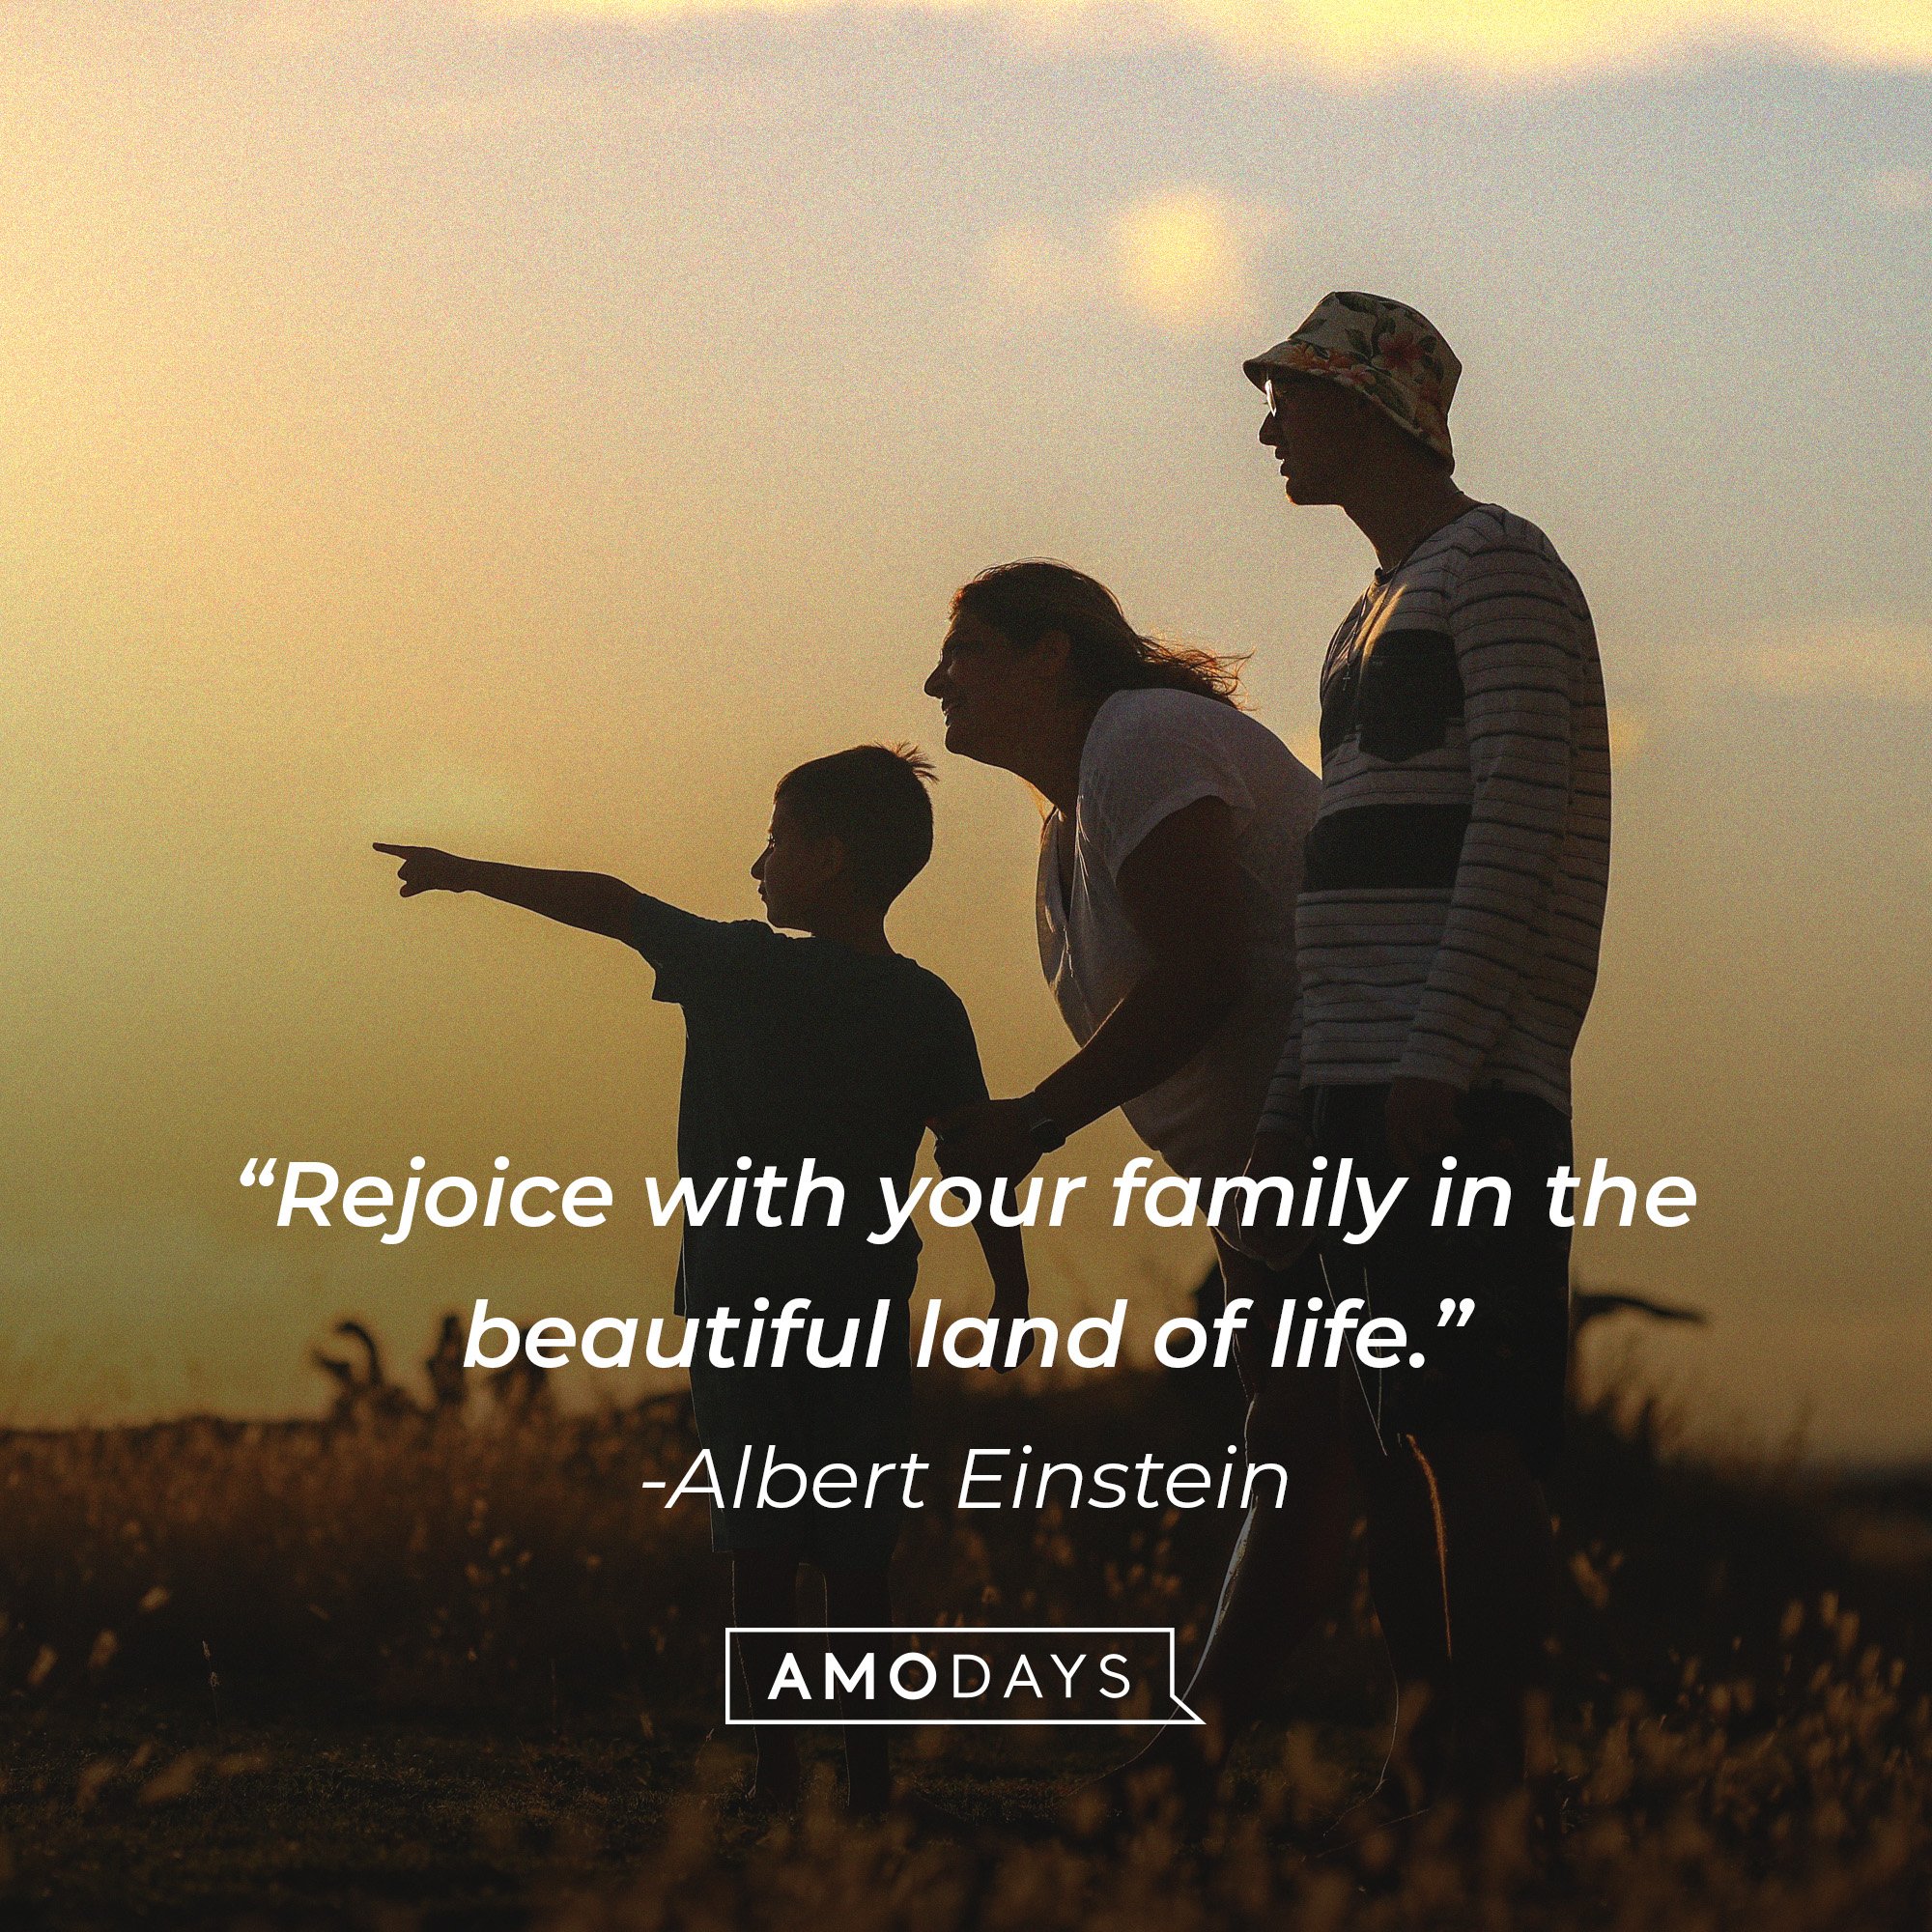 Albert Einstein's quote: “Rejoice with your family in the beautiful land of life.” | Image: AmoDays